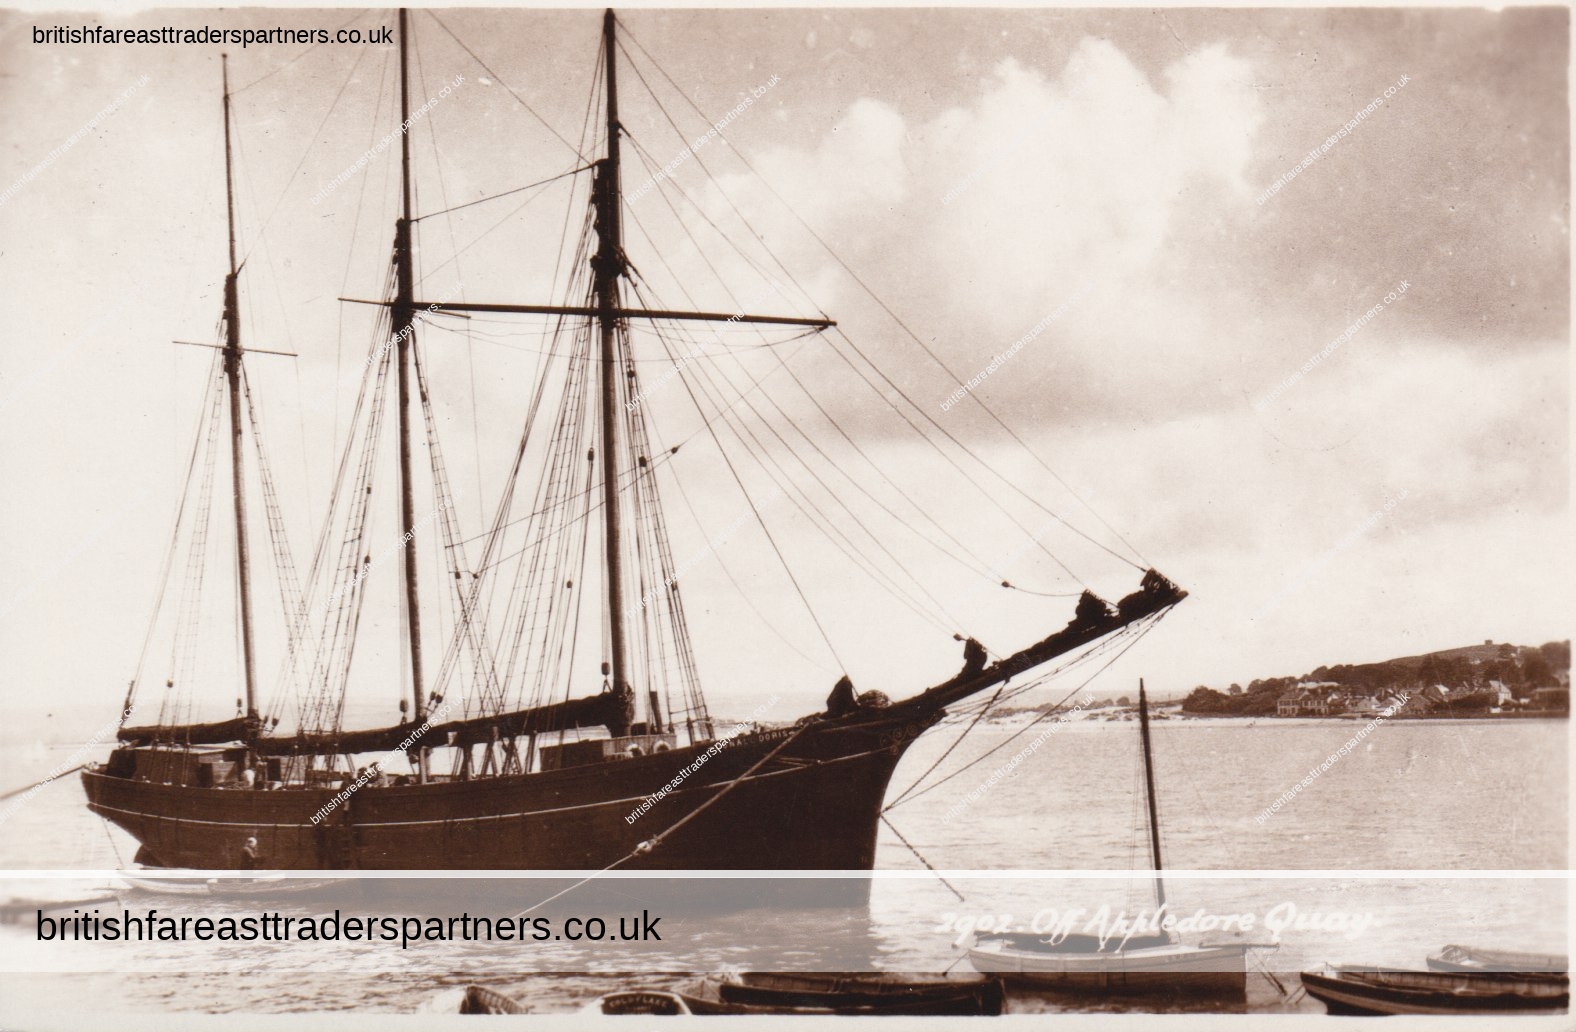 VINTAGE SHIP “2902 OFF APPLEDORE QUAY”  APPLEDORE QUAY, DEVON, ENGLAND REAL PHOTO POSTCARD (RPPC) ANTIQUE SHIPS | COLLECTABLES | TRANSPORTATION COLLECTABLES | NAUTICAL | OCEAN LINERS | TOPOGRAPHICAL |  LIFESTYLE | HERITAGE | HISTORY